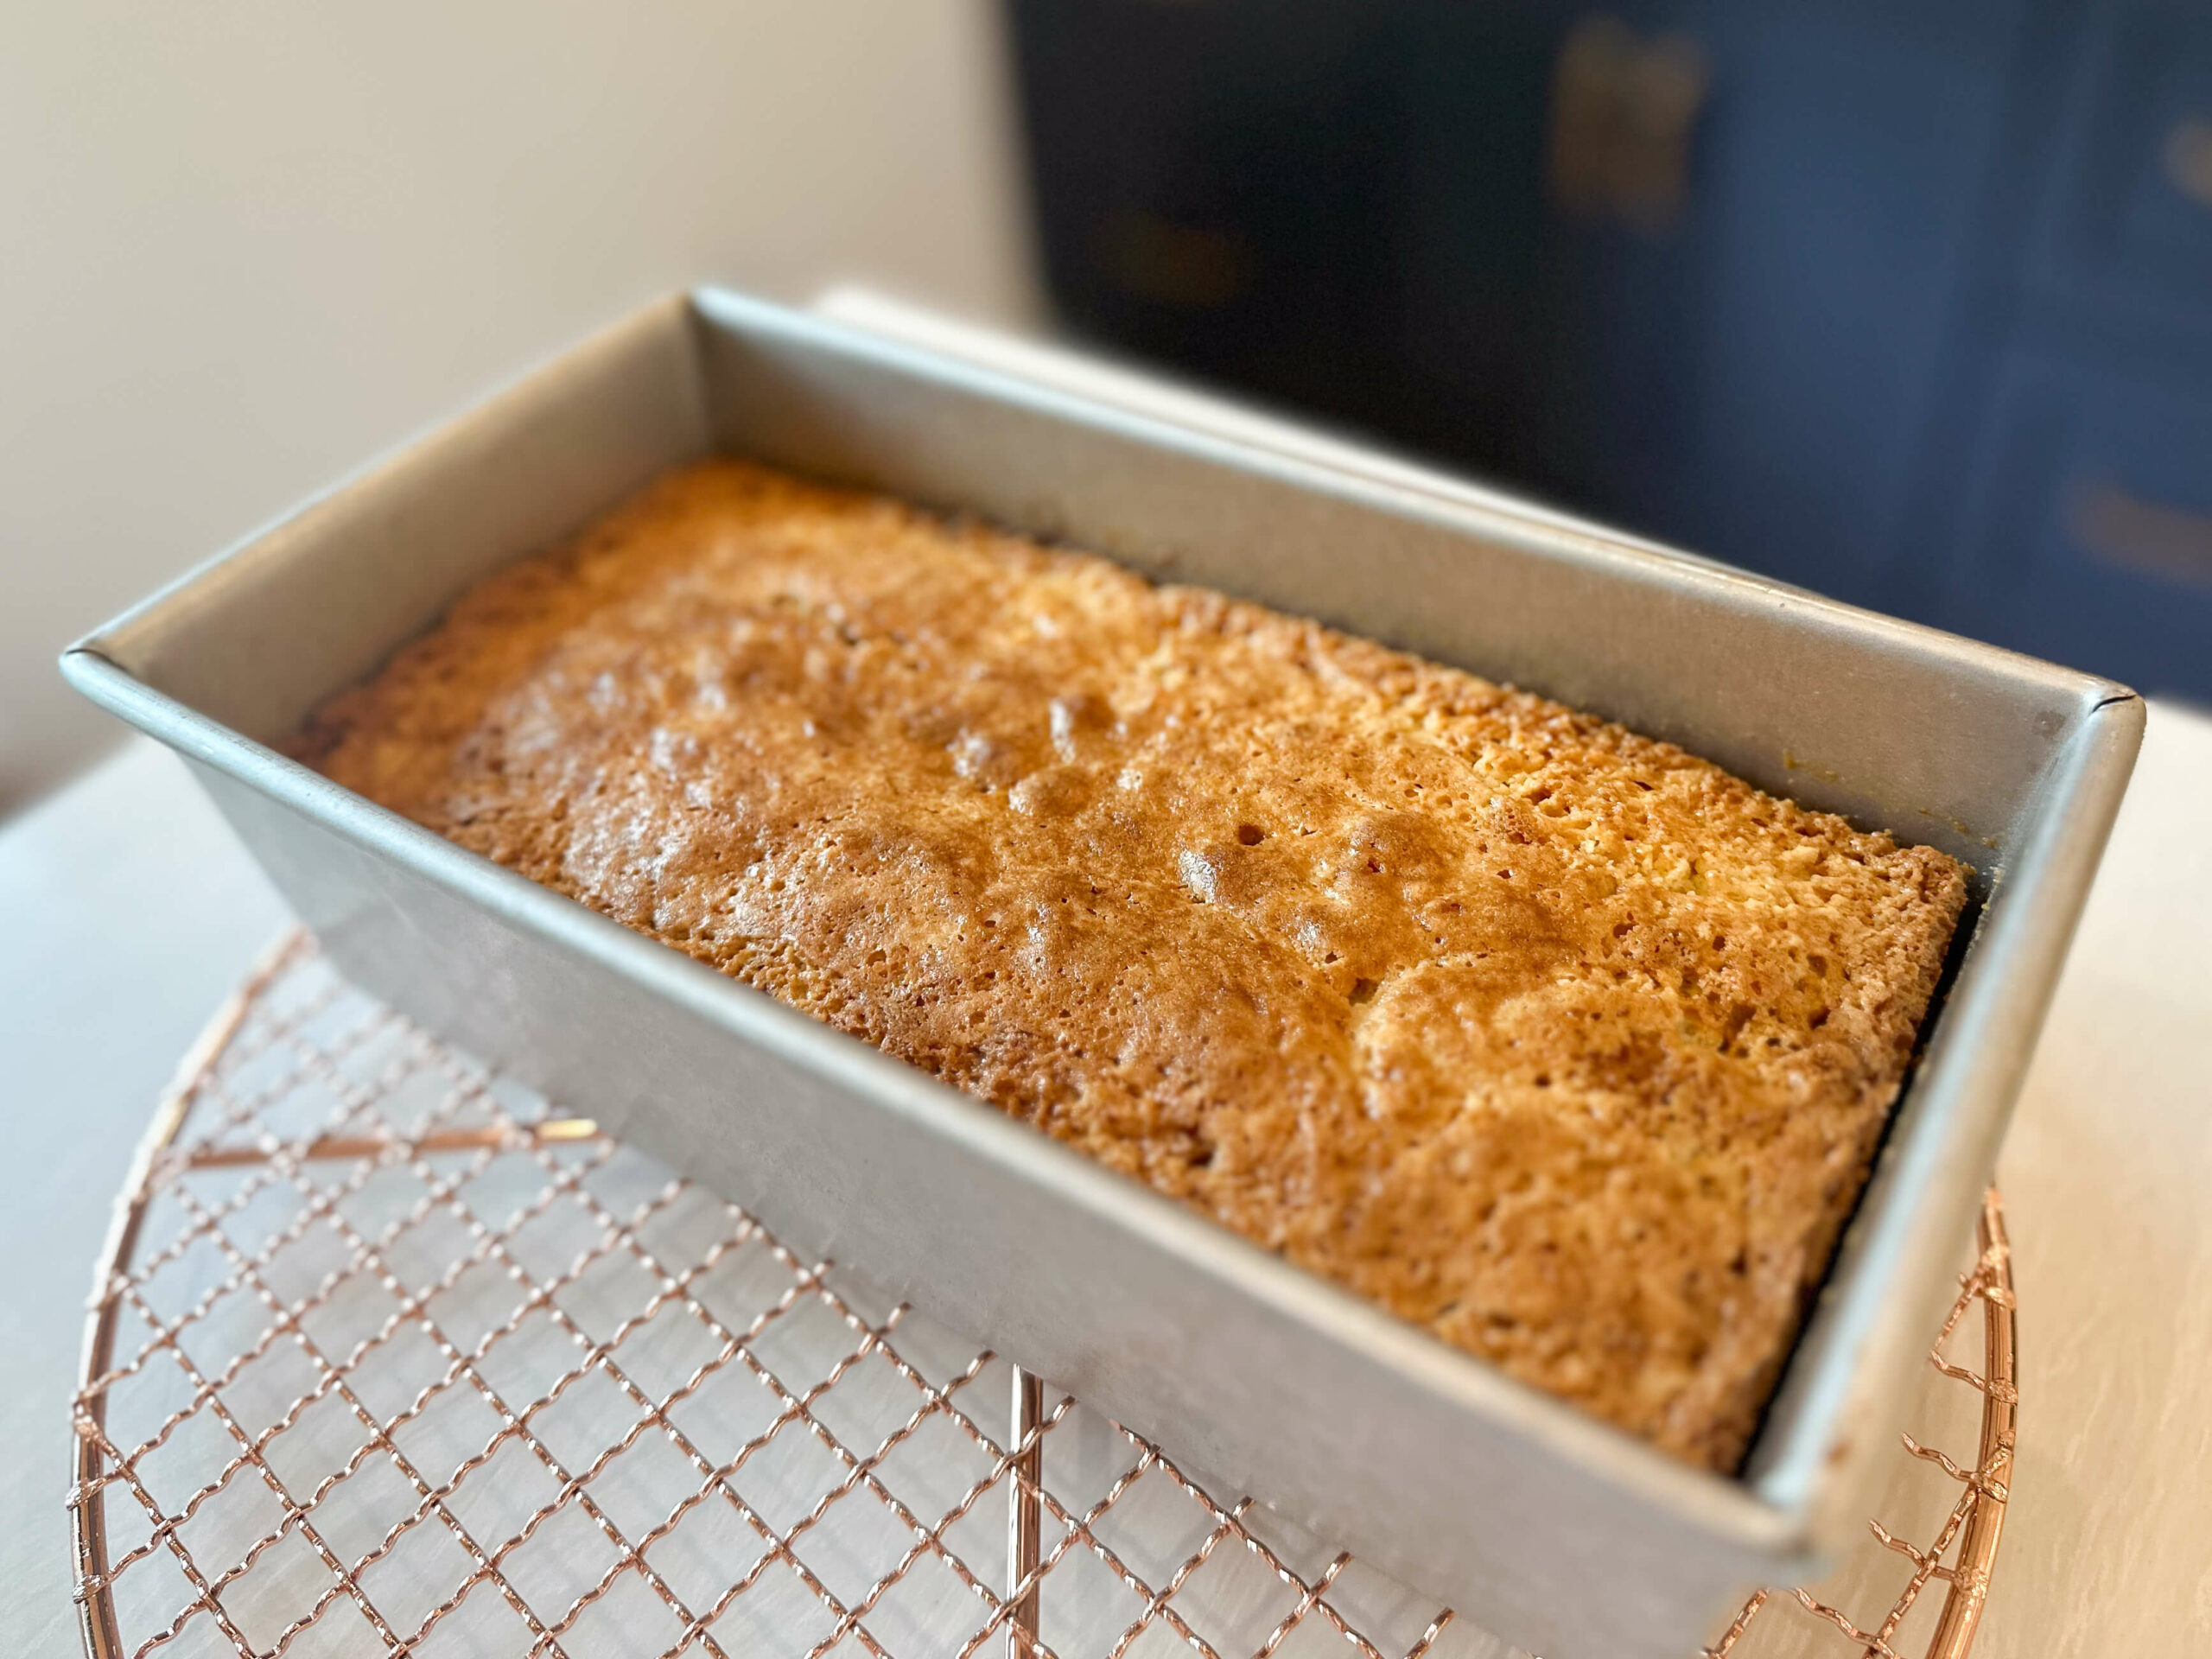 strawberry loaf cake baked and cooling down 